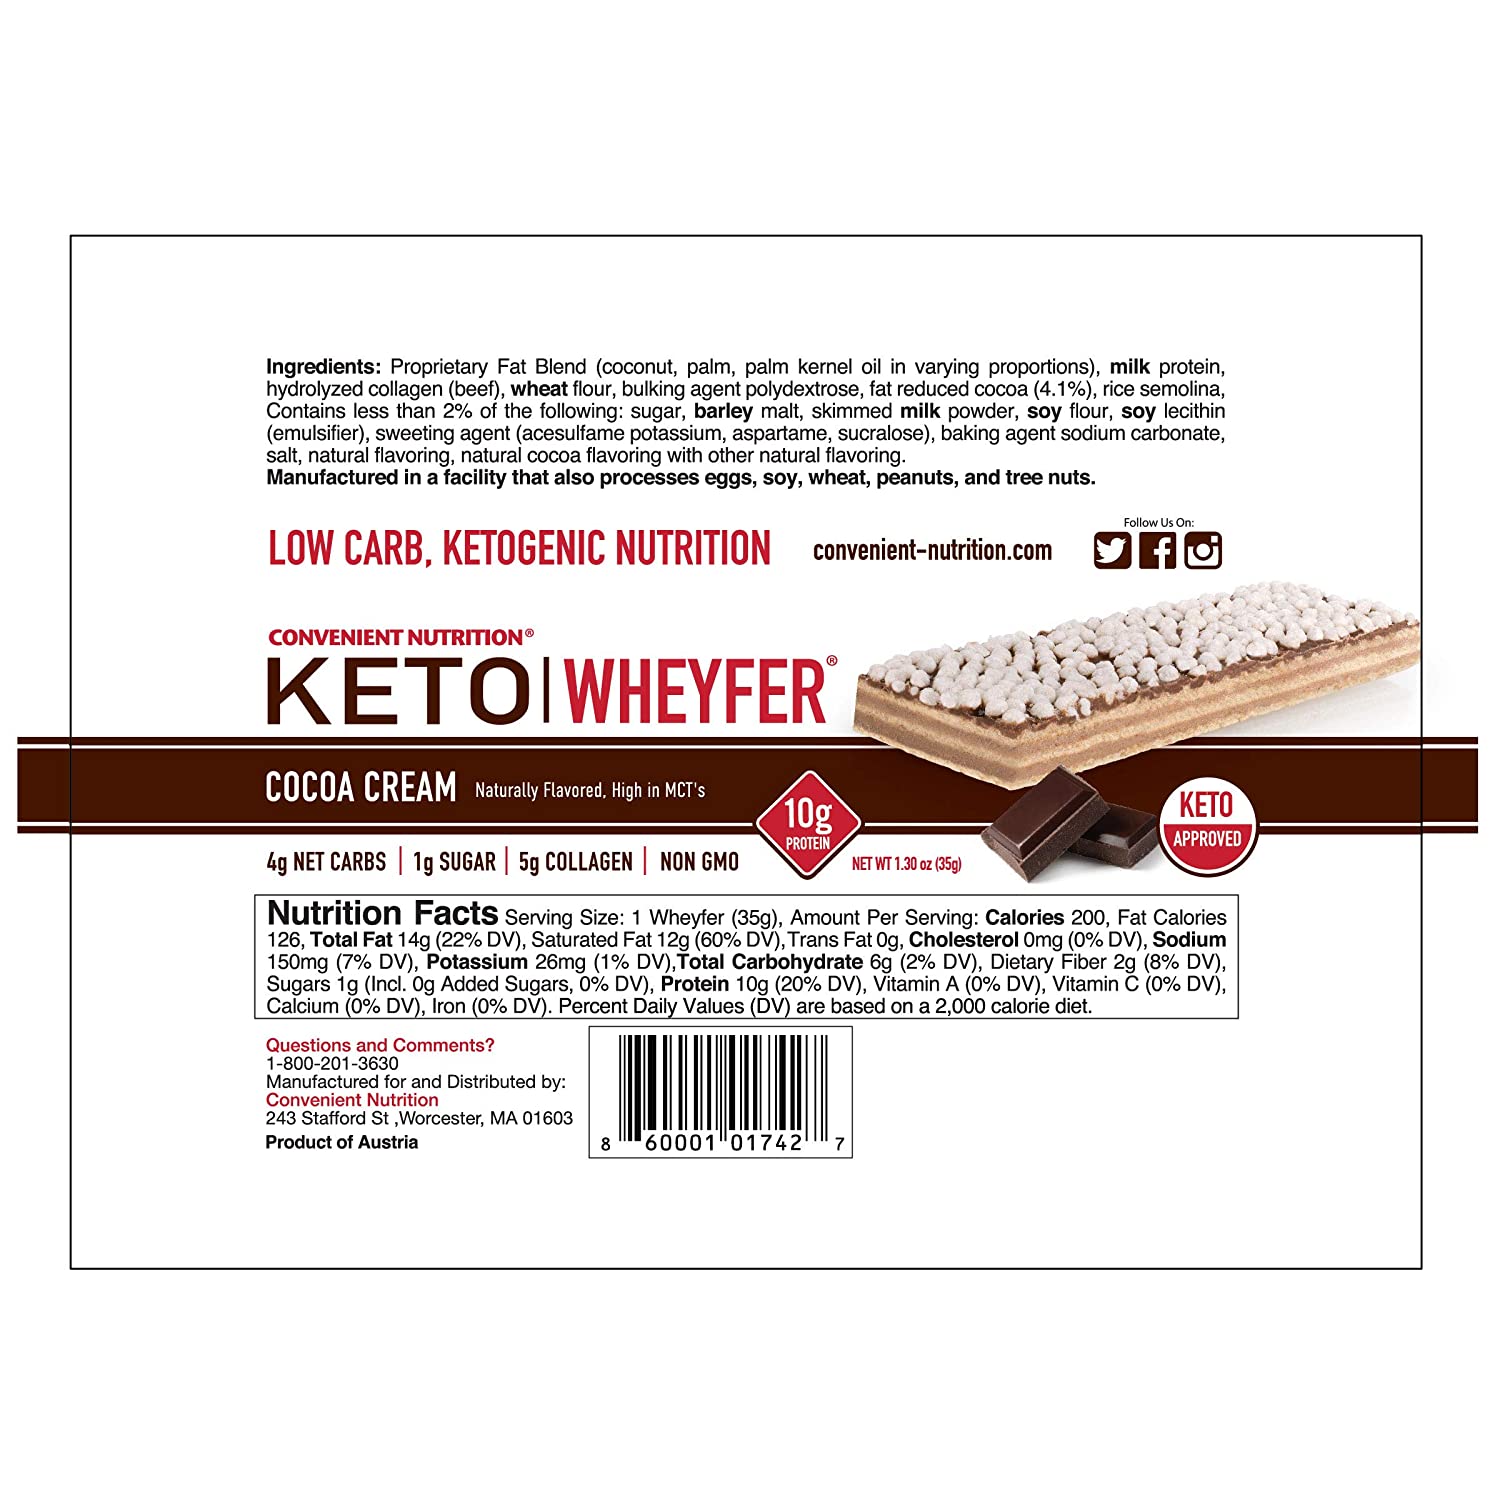 Convenient Nutrition Keto WheyFer Protein Bars - 4-Flavor Variety Pack - High-quality Protein Bars by Convenient Nutrition at 